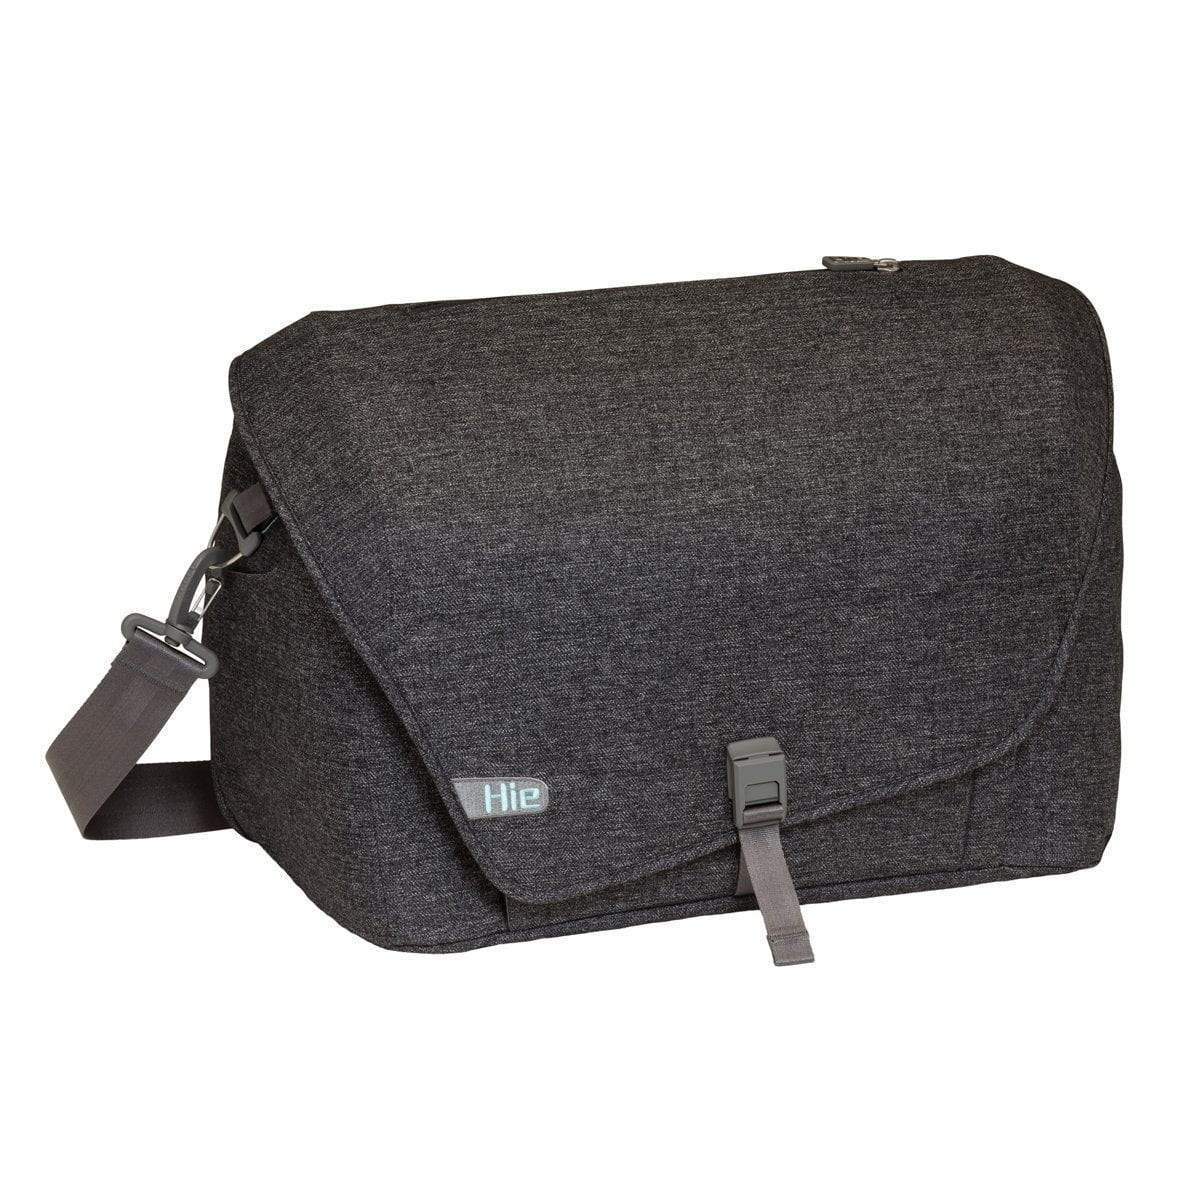 The Hie Diaper bag in the color Jet which is a dark gray. 